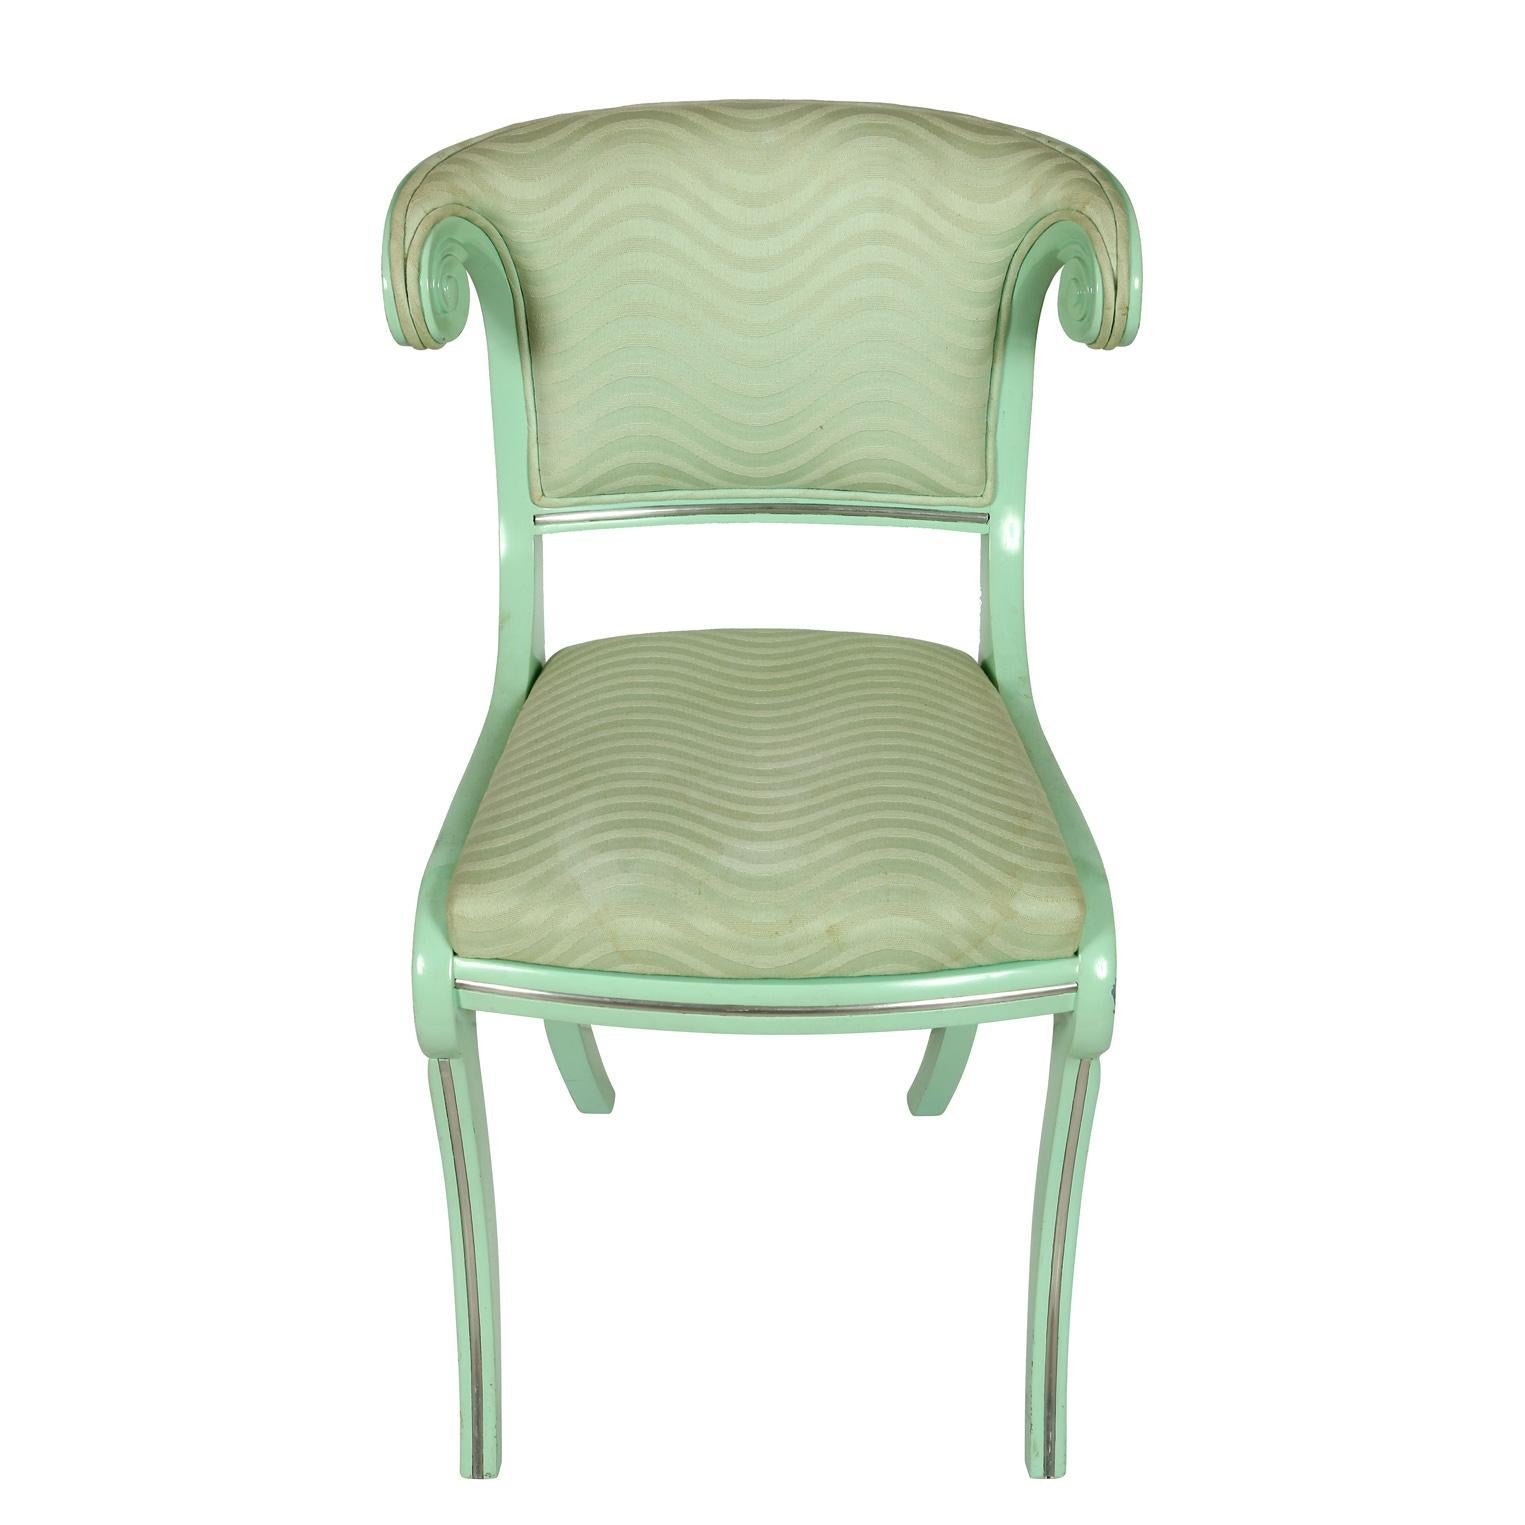 A set of six aqua lacquered klismos style dining chairs with twist details to back. Upholstered seats and back.